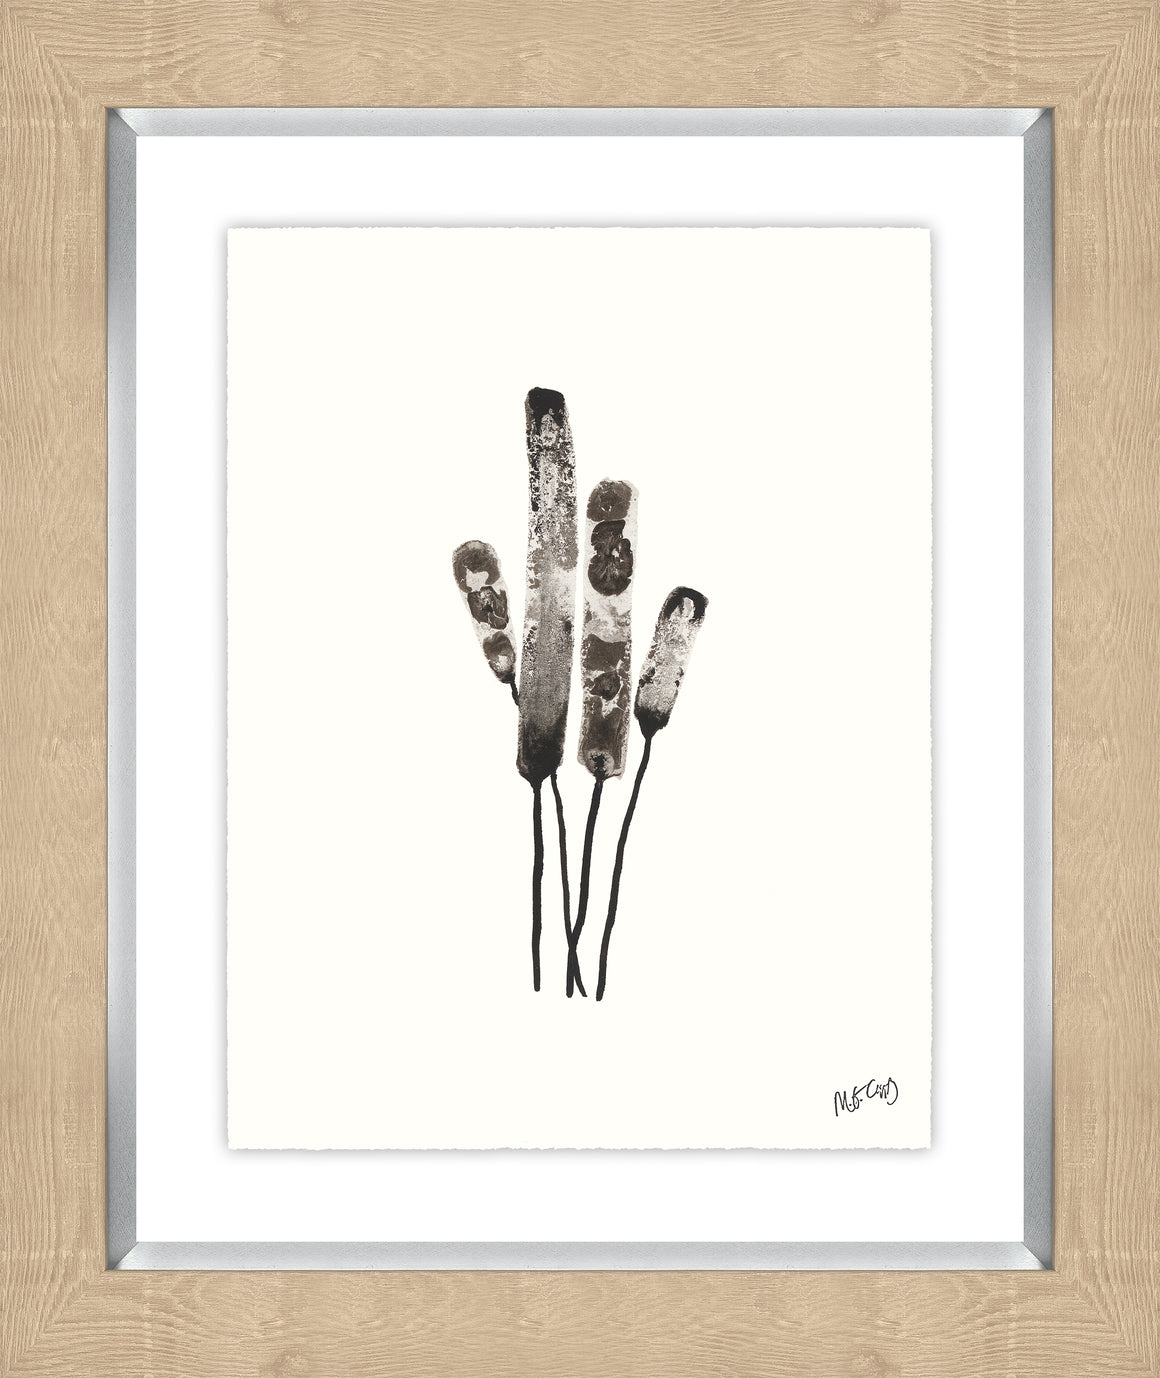 Plant Life III by M.G. Capps - 16" x 20" Framed